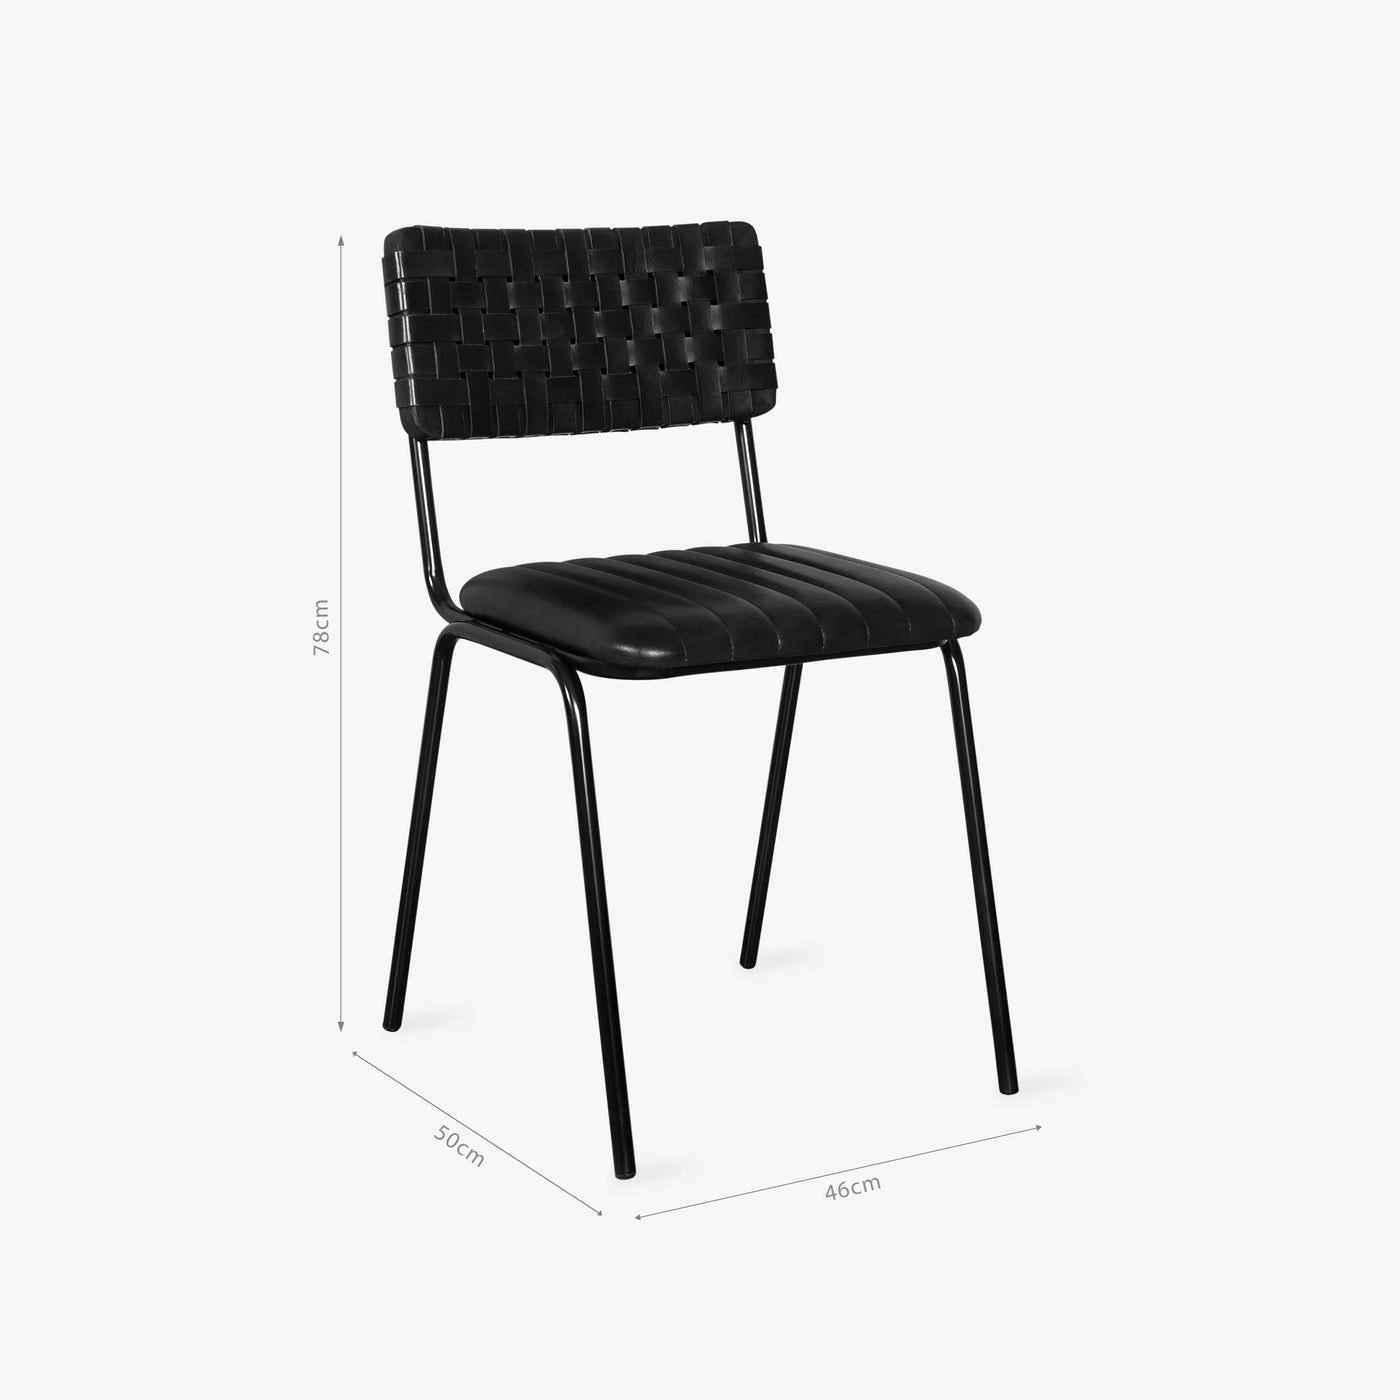 Algar Woven Leather Dining Chair, Black Dining Chairs & Benches sazy.com